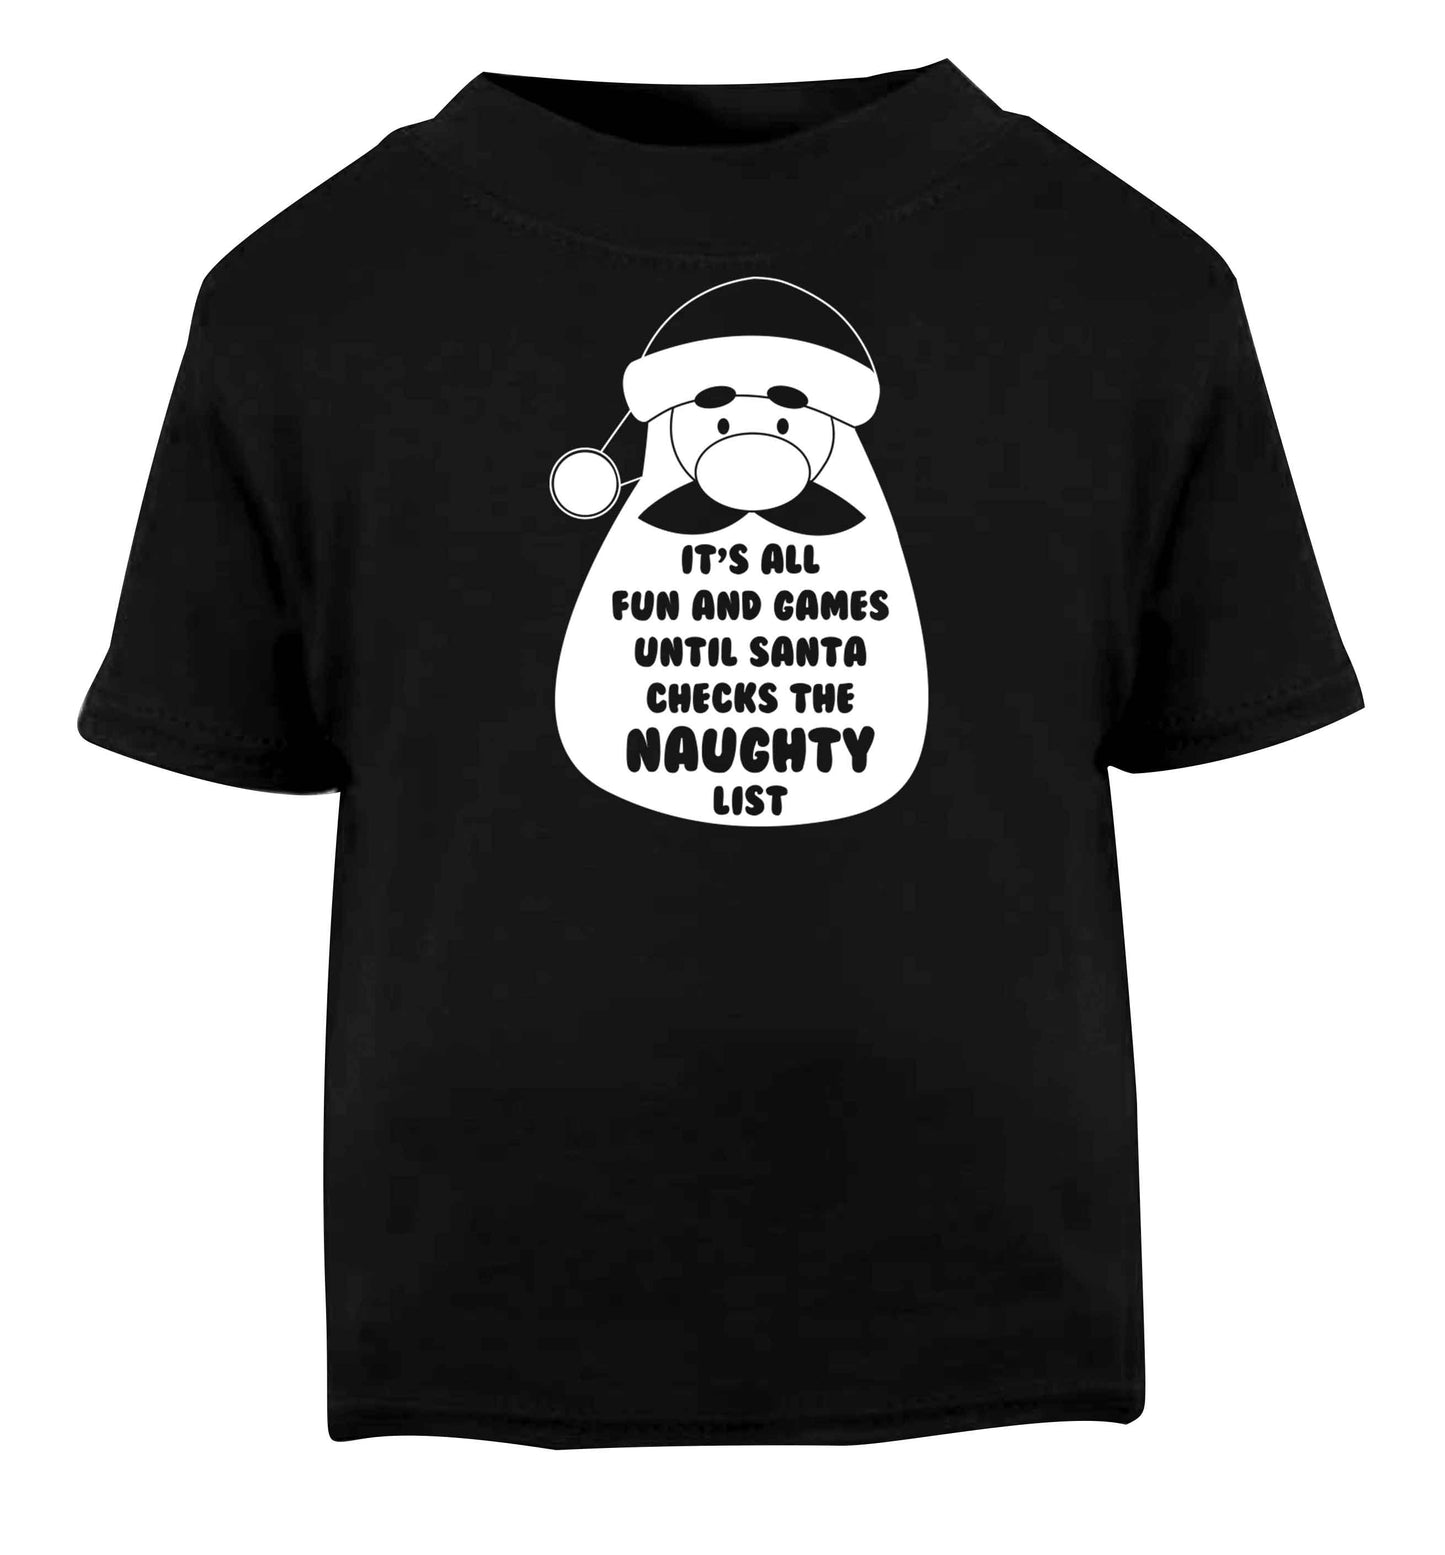 It's all fun and games until Santa checks the naughty list Black baby toddler Tshirt 2 years